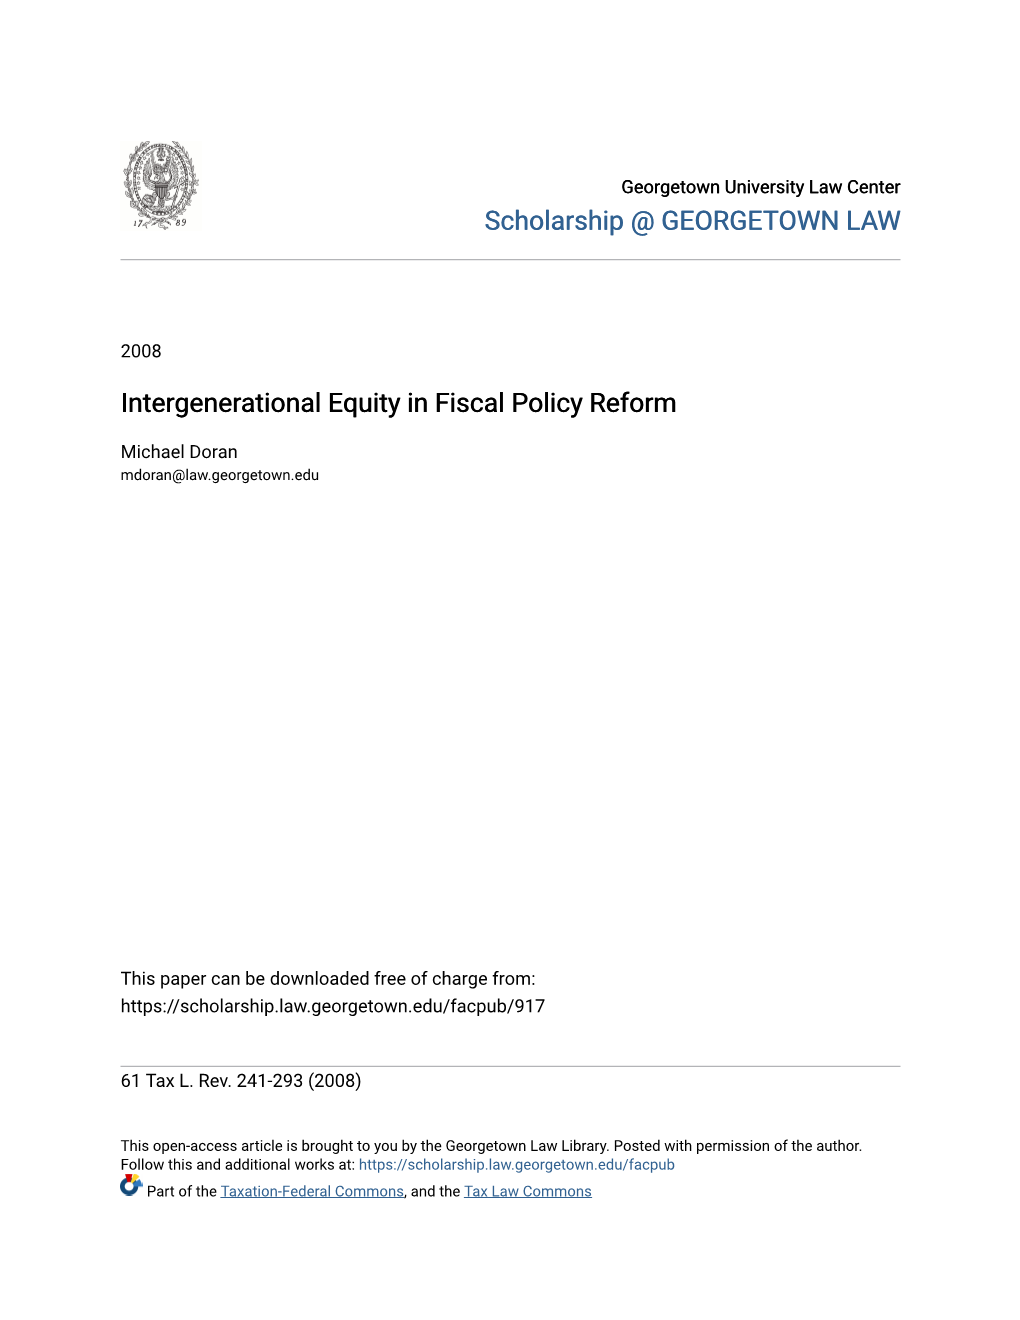 Intergenerational Equity in Fiscal Policy Reform